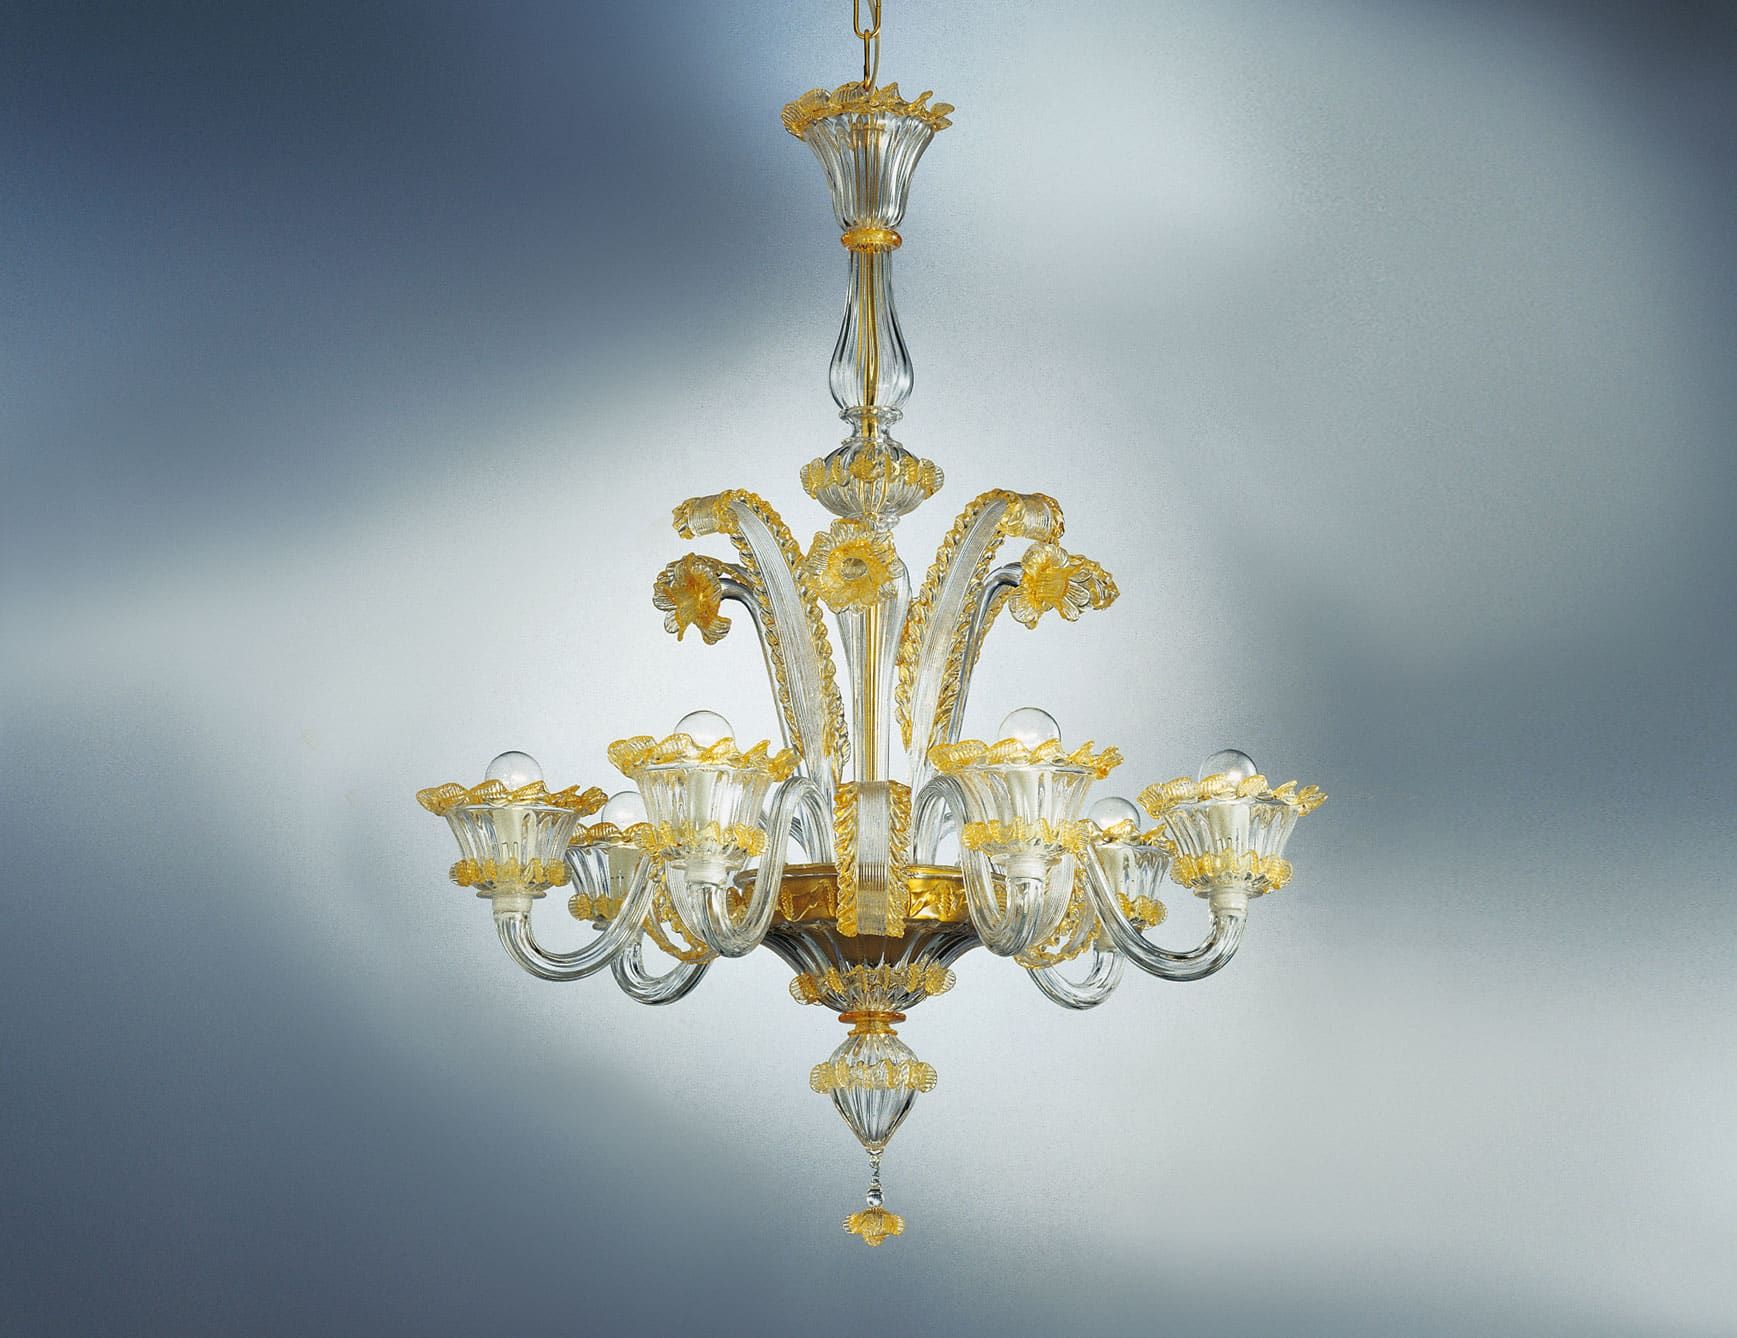 Cavendramin modern Italian chandelier with clear glass